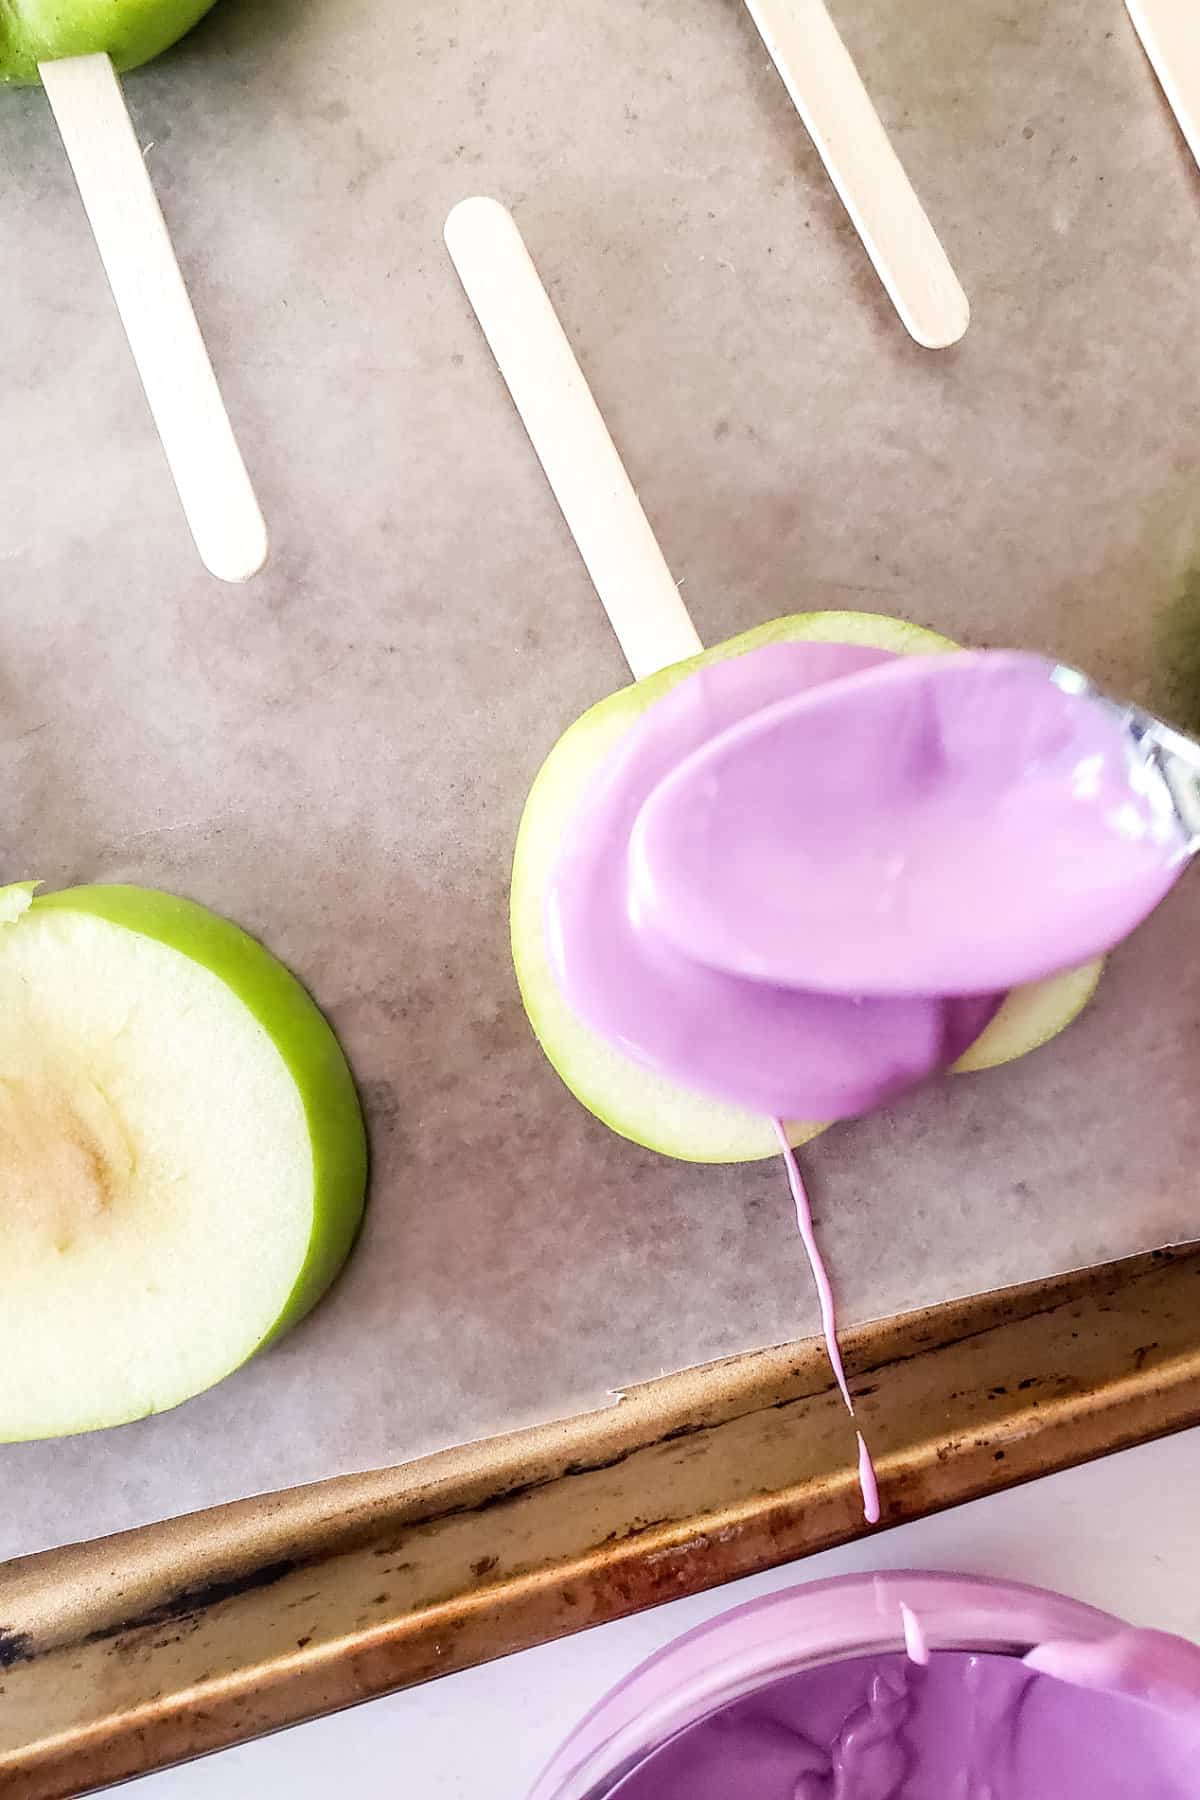 melted purple candy on slices of green apple.